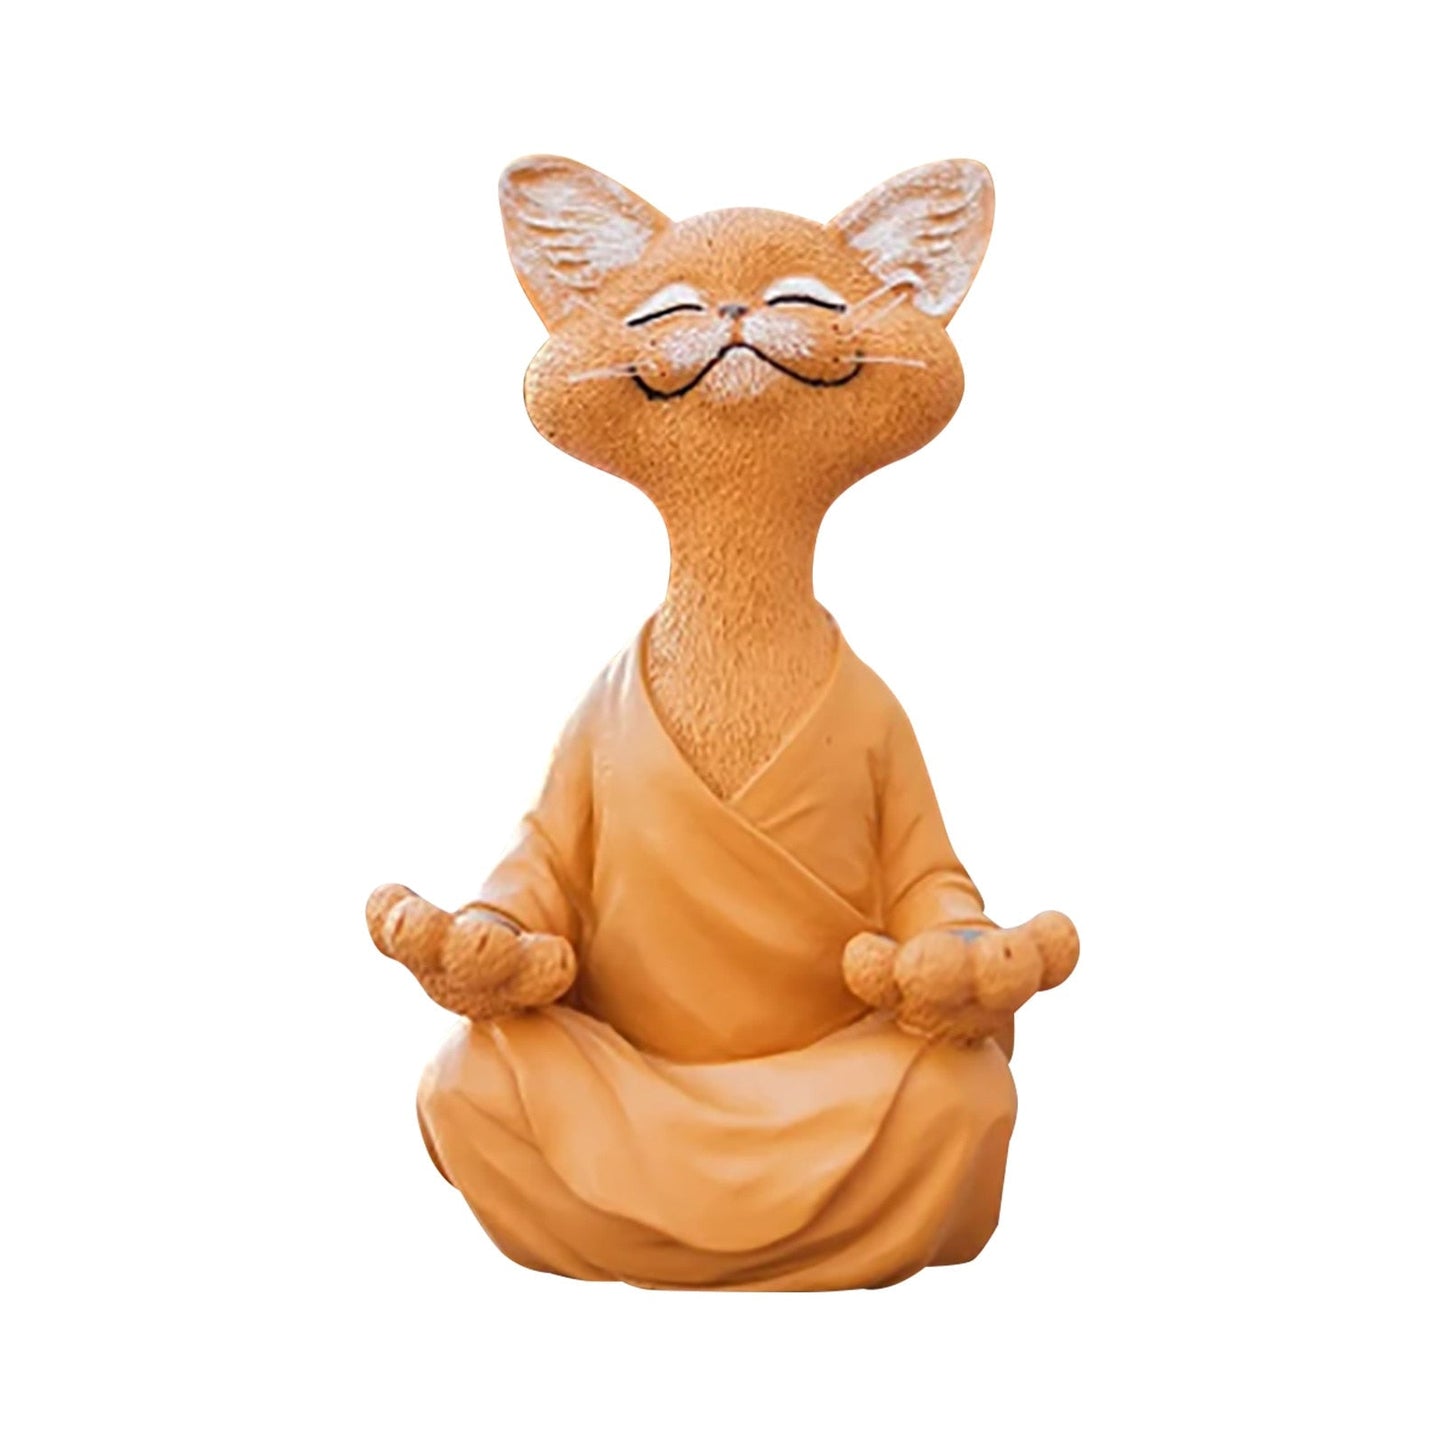 an orange cat sculpture featuring a cat doing meditation in a robe while smiling